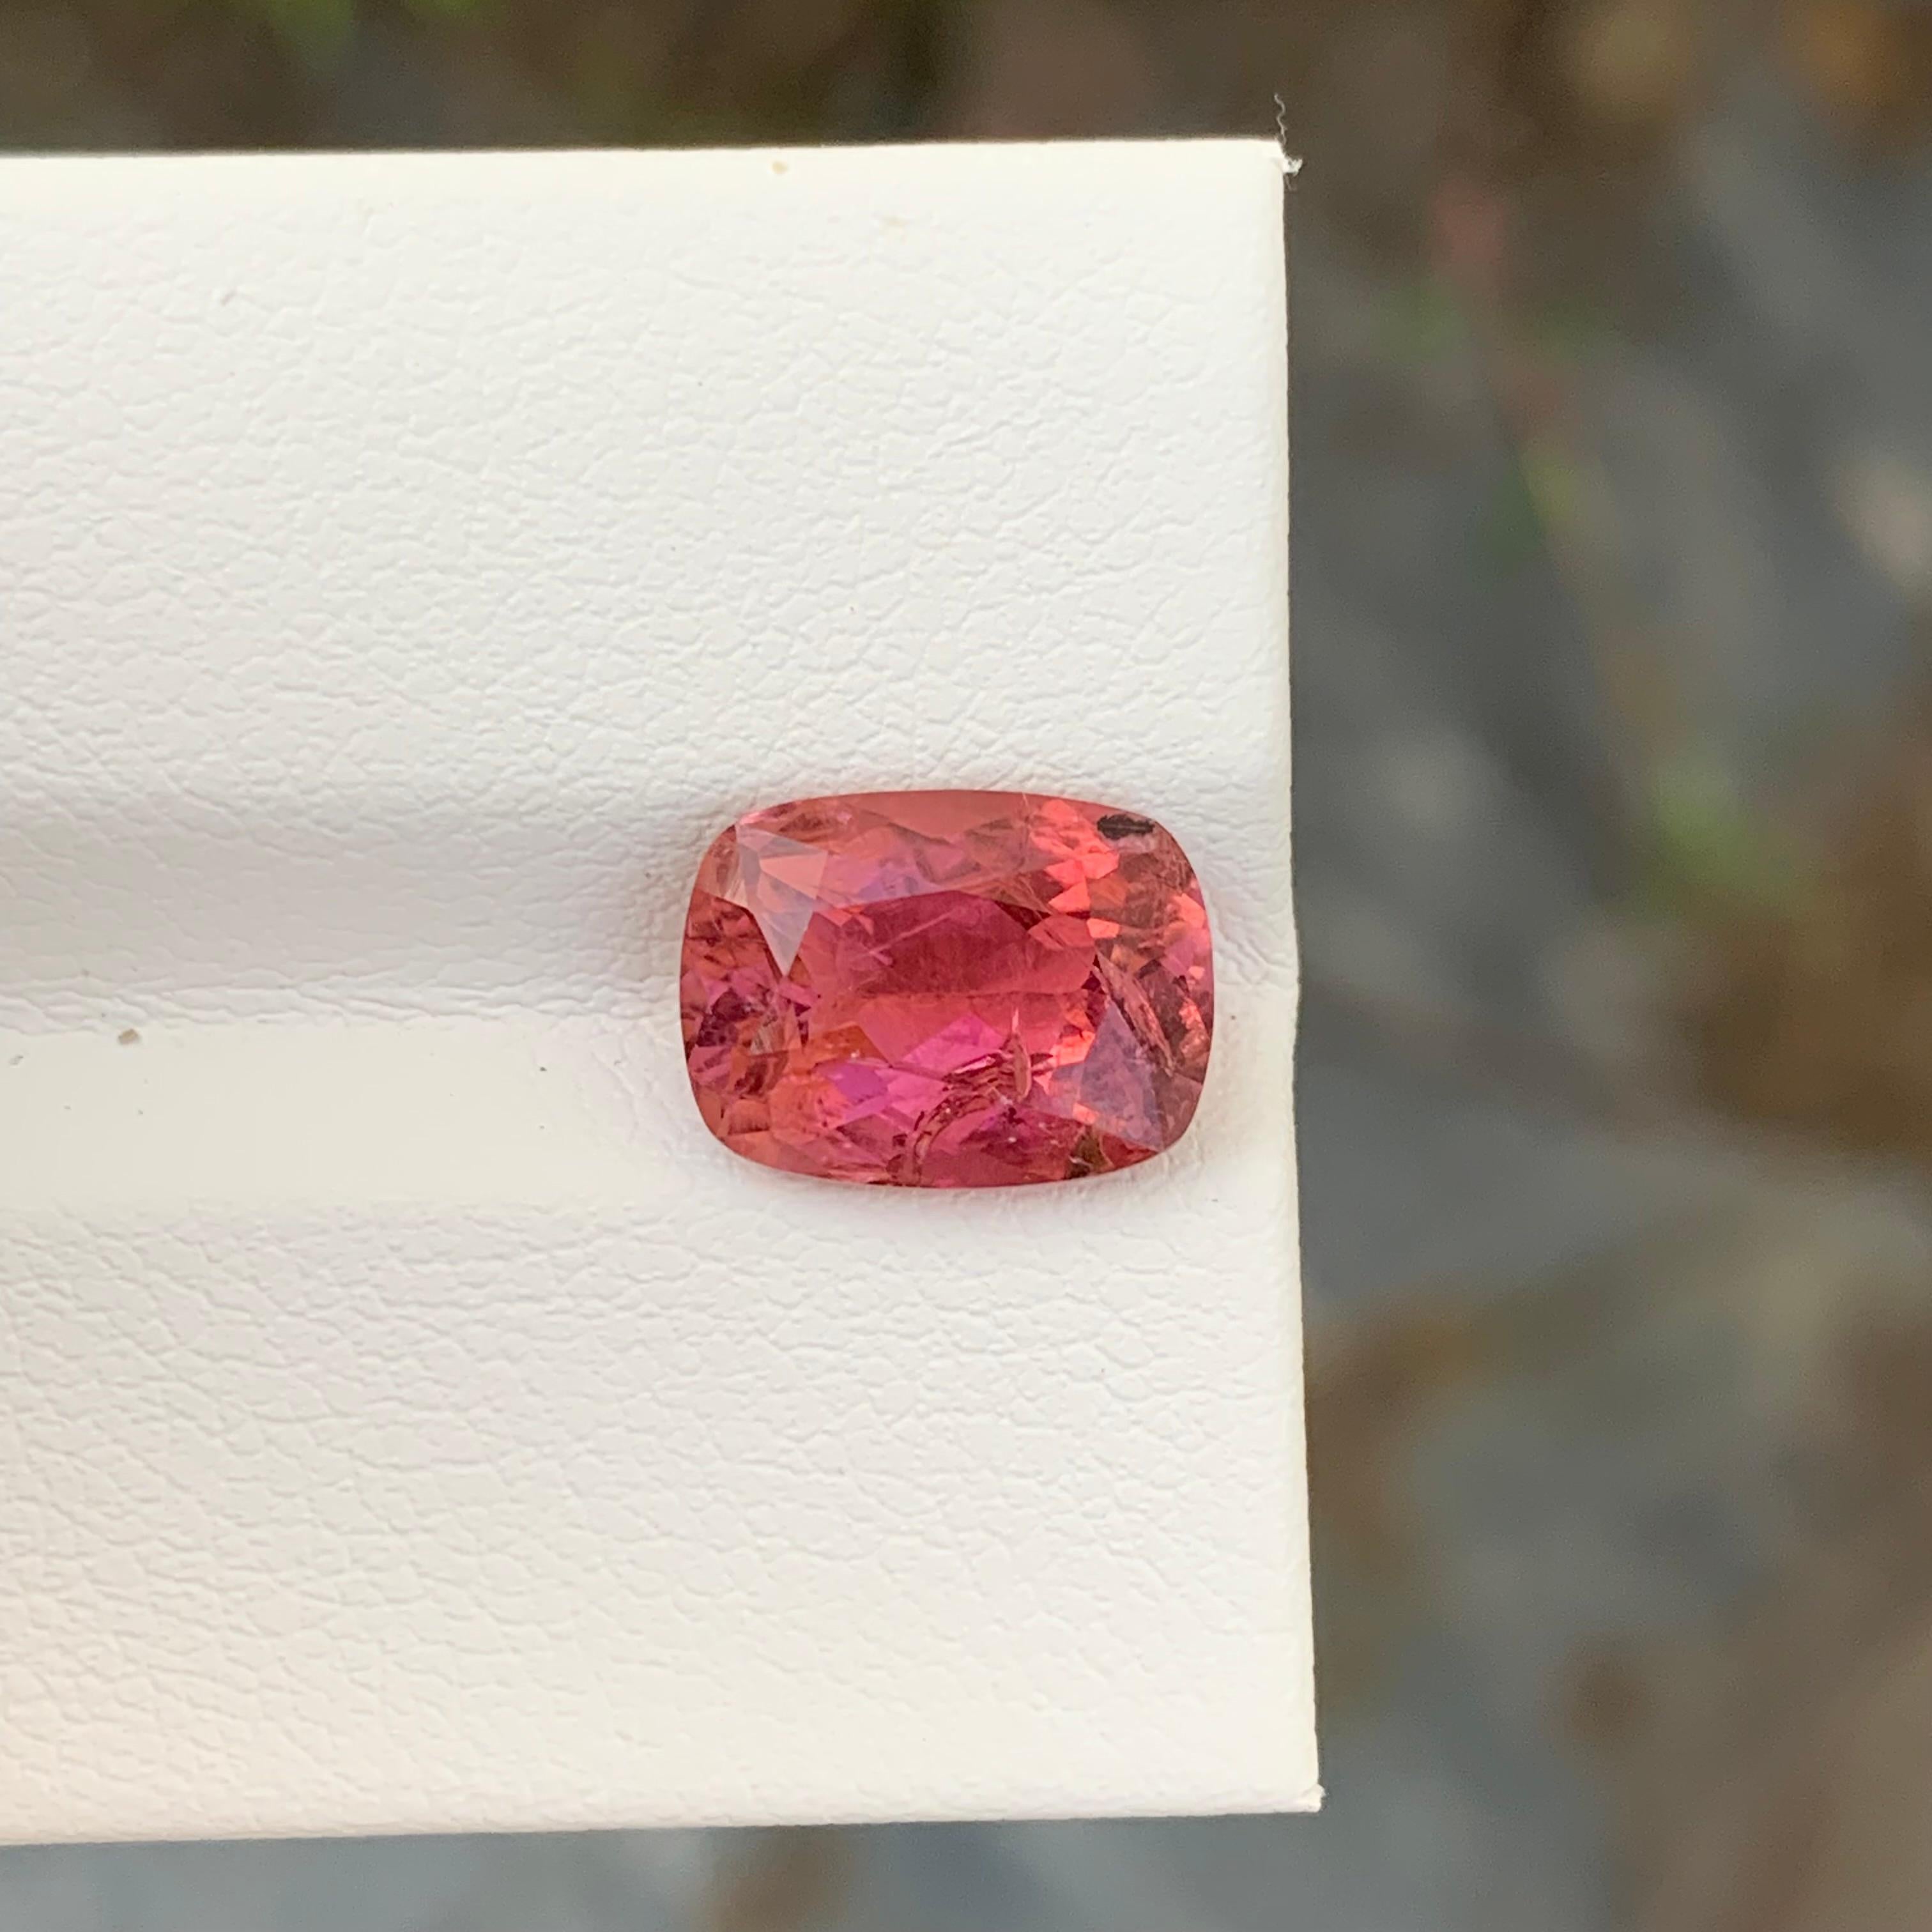 3.20 Carat Faceted Rubellite Tourmaline Cushion Shape Gem From Africa  For Sale 3